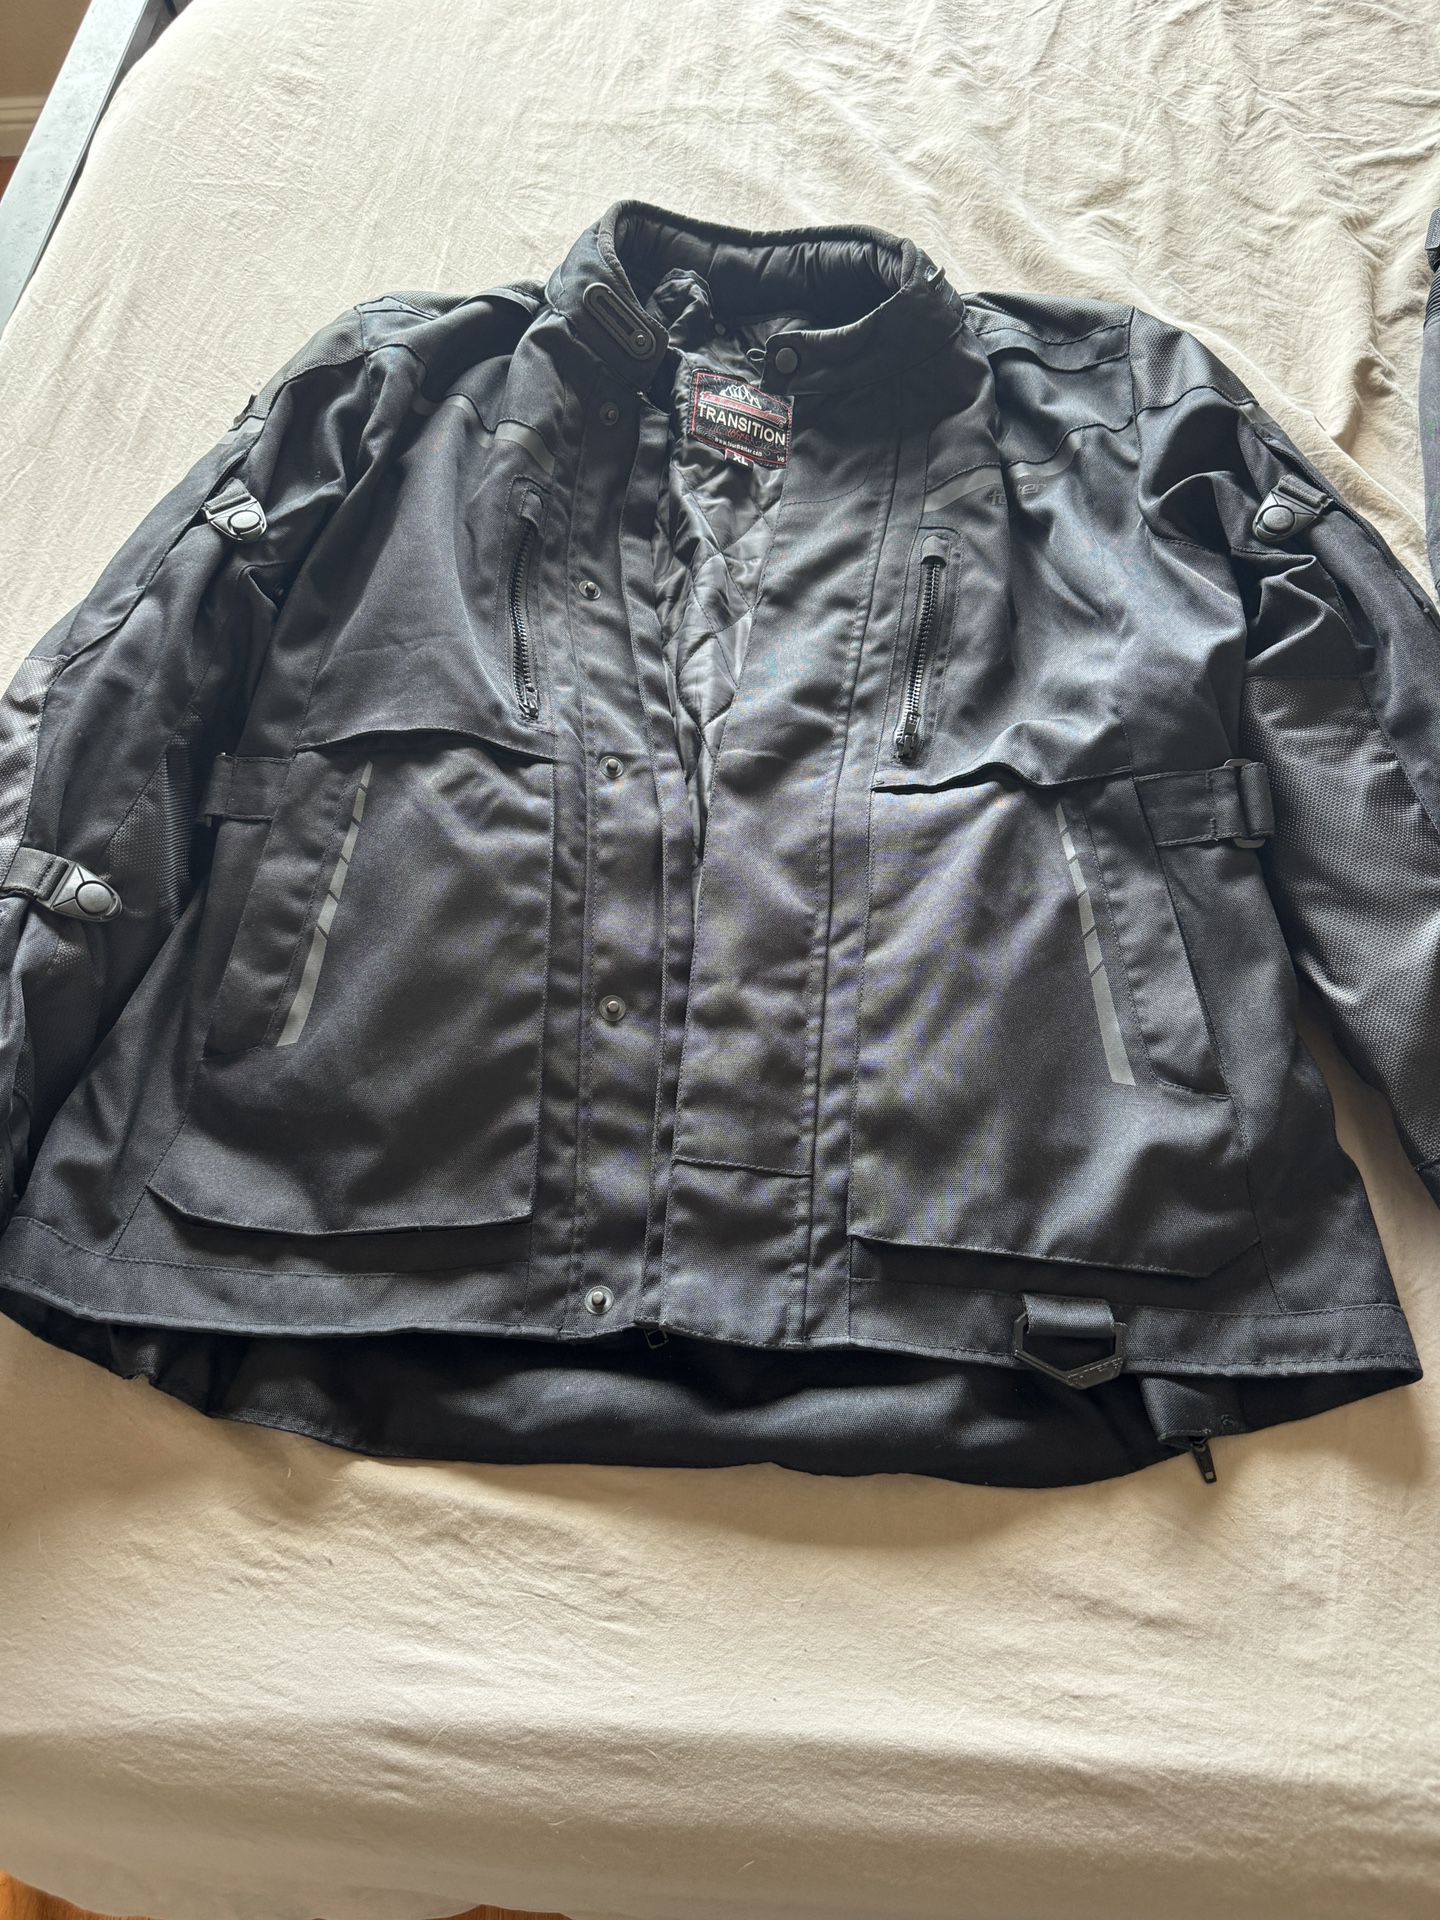 Lightly Used Motorcycle Riding Gear